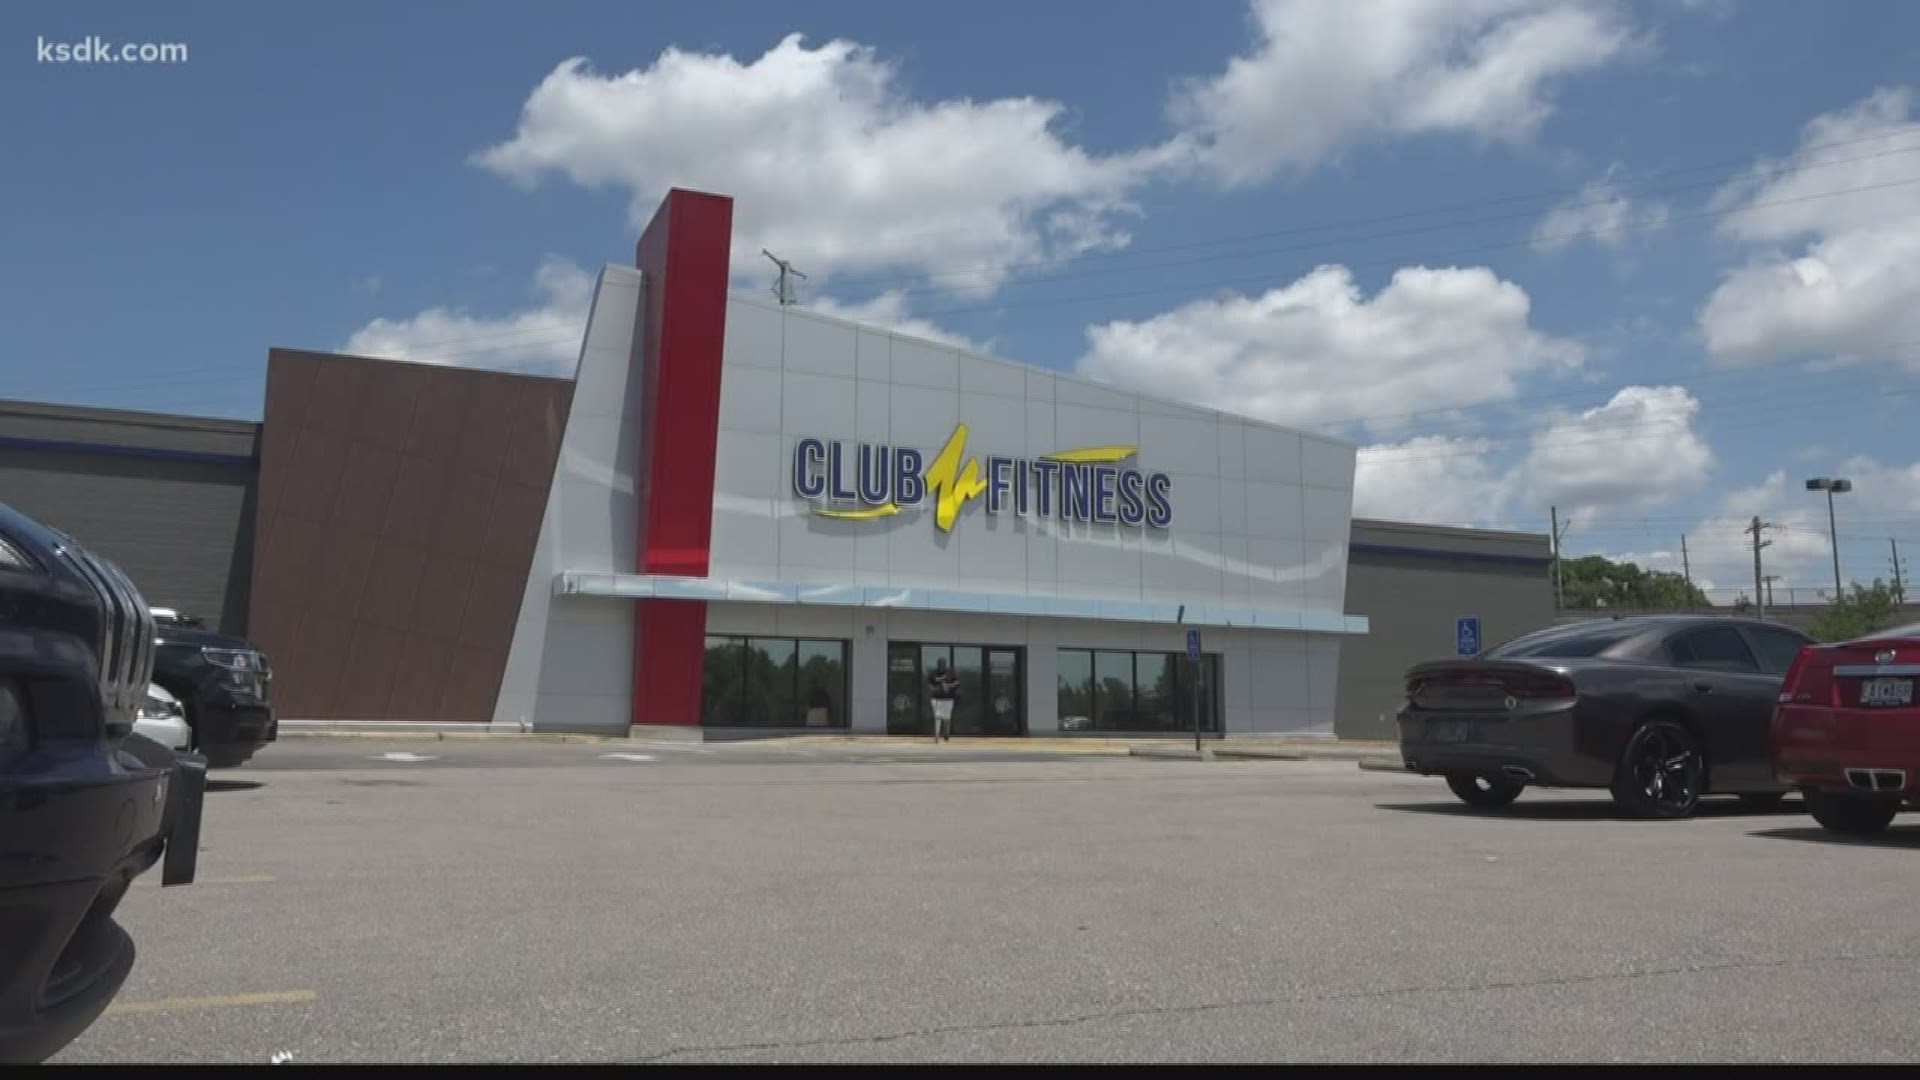 Check out the new Club Fitness in Hazelwood, Missouri. Not a member? Now through July 31st membership is $4 at any 24 locations.